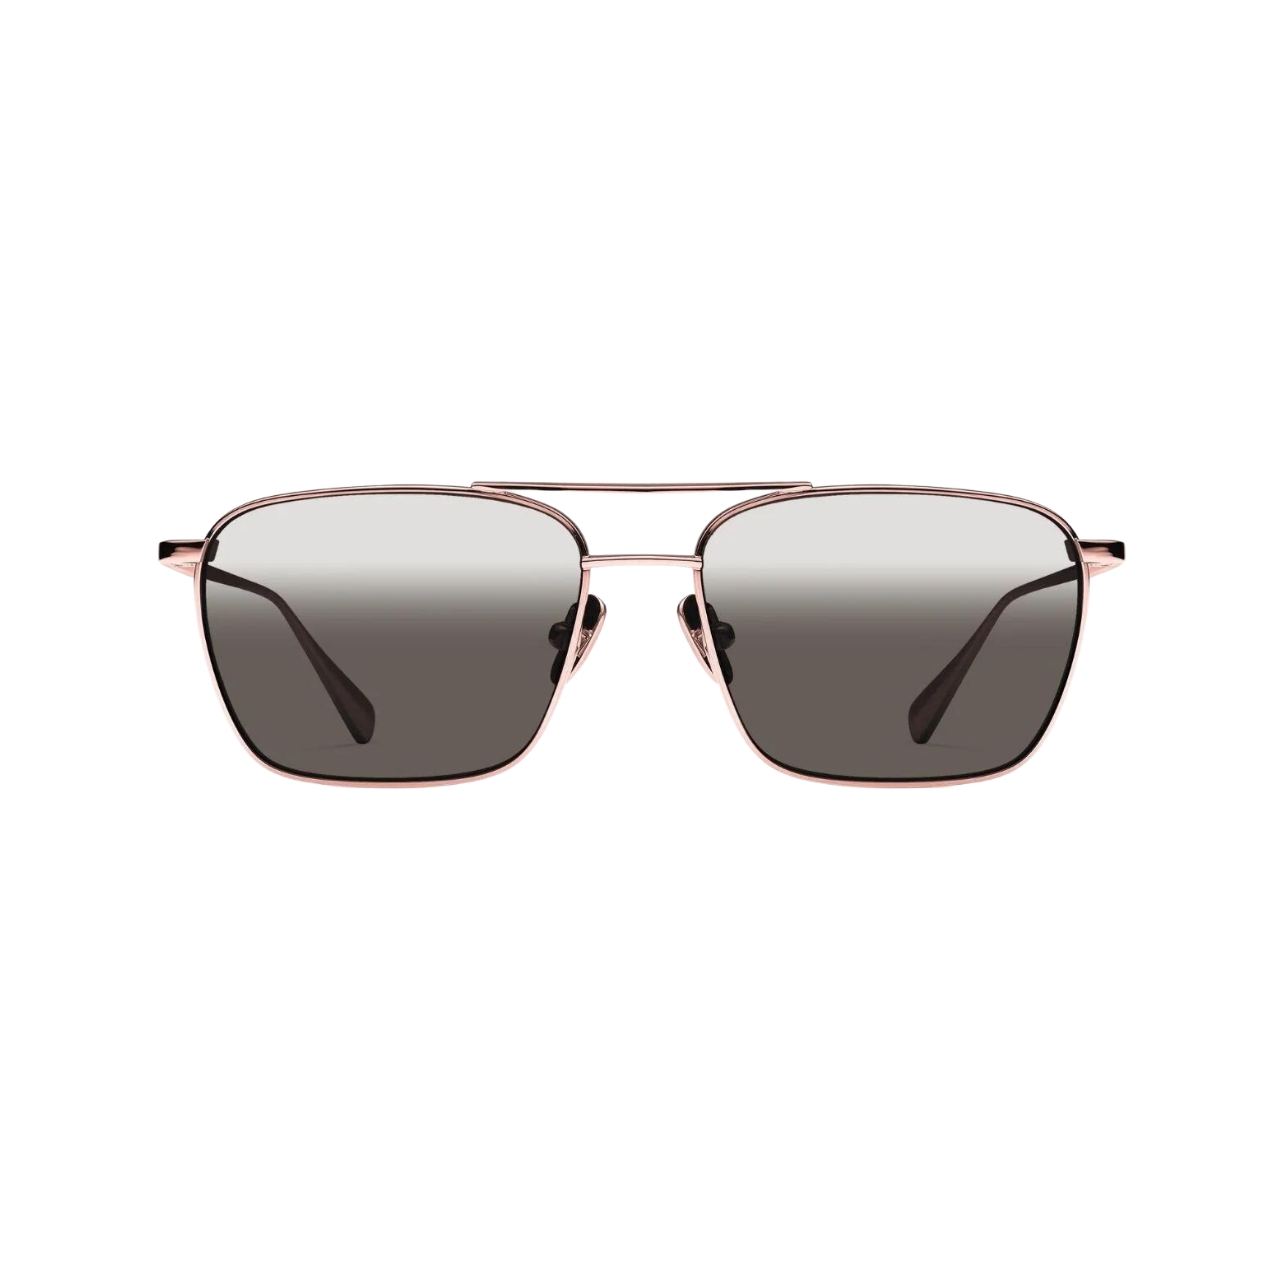 Morgenthal Frederics tailored navigator sunglasses with traditional plating and lens